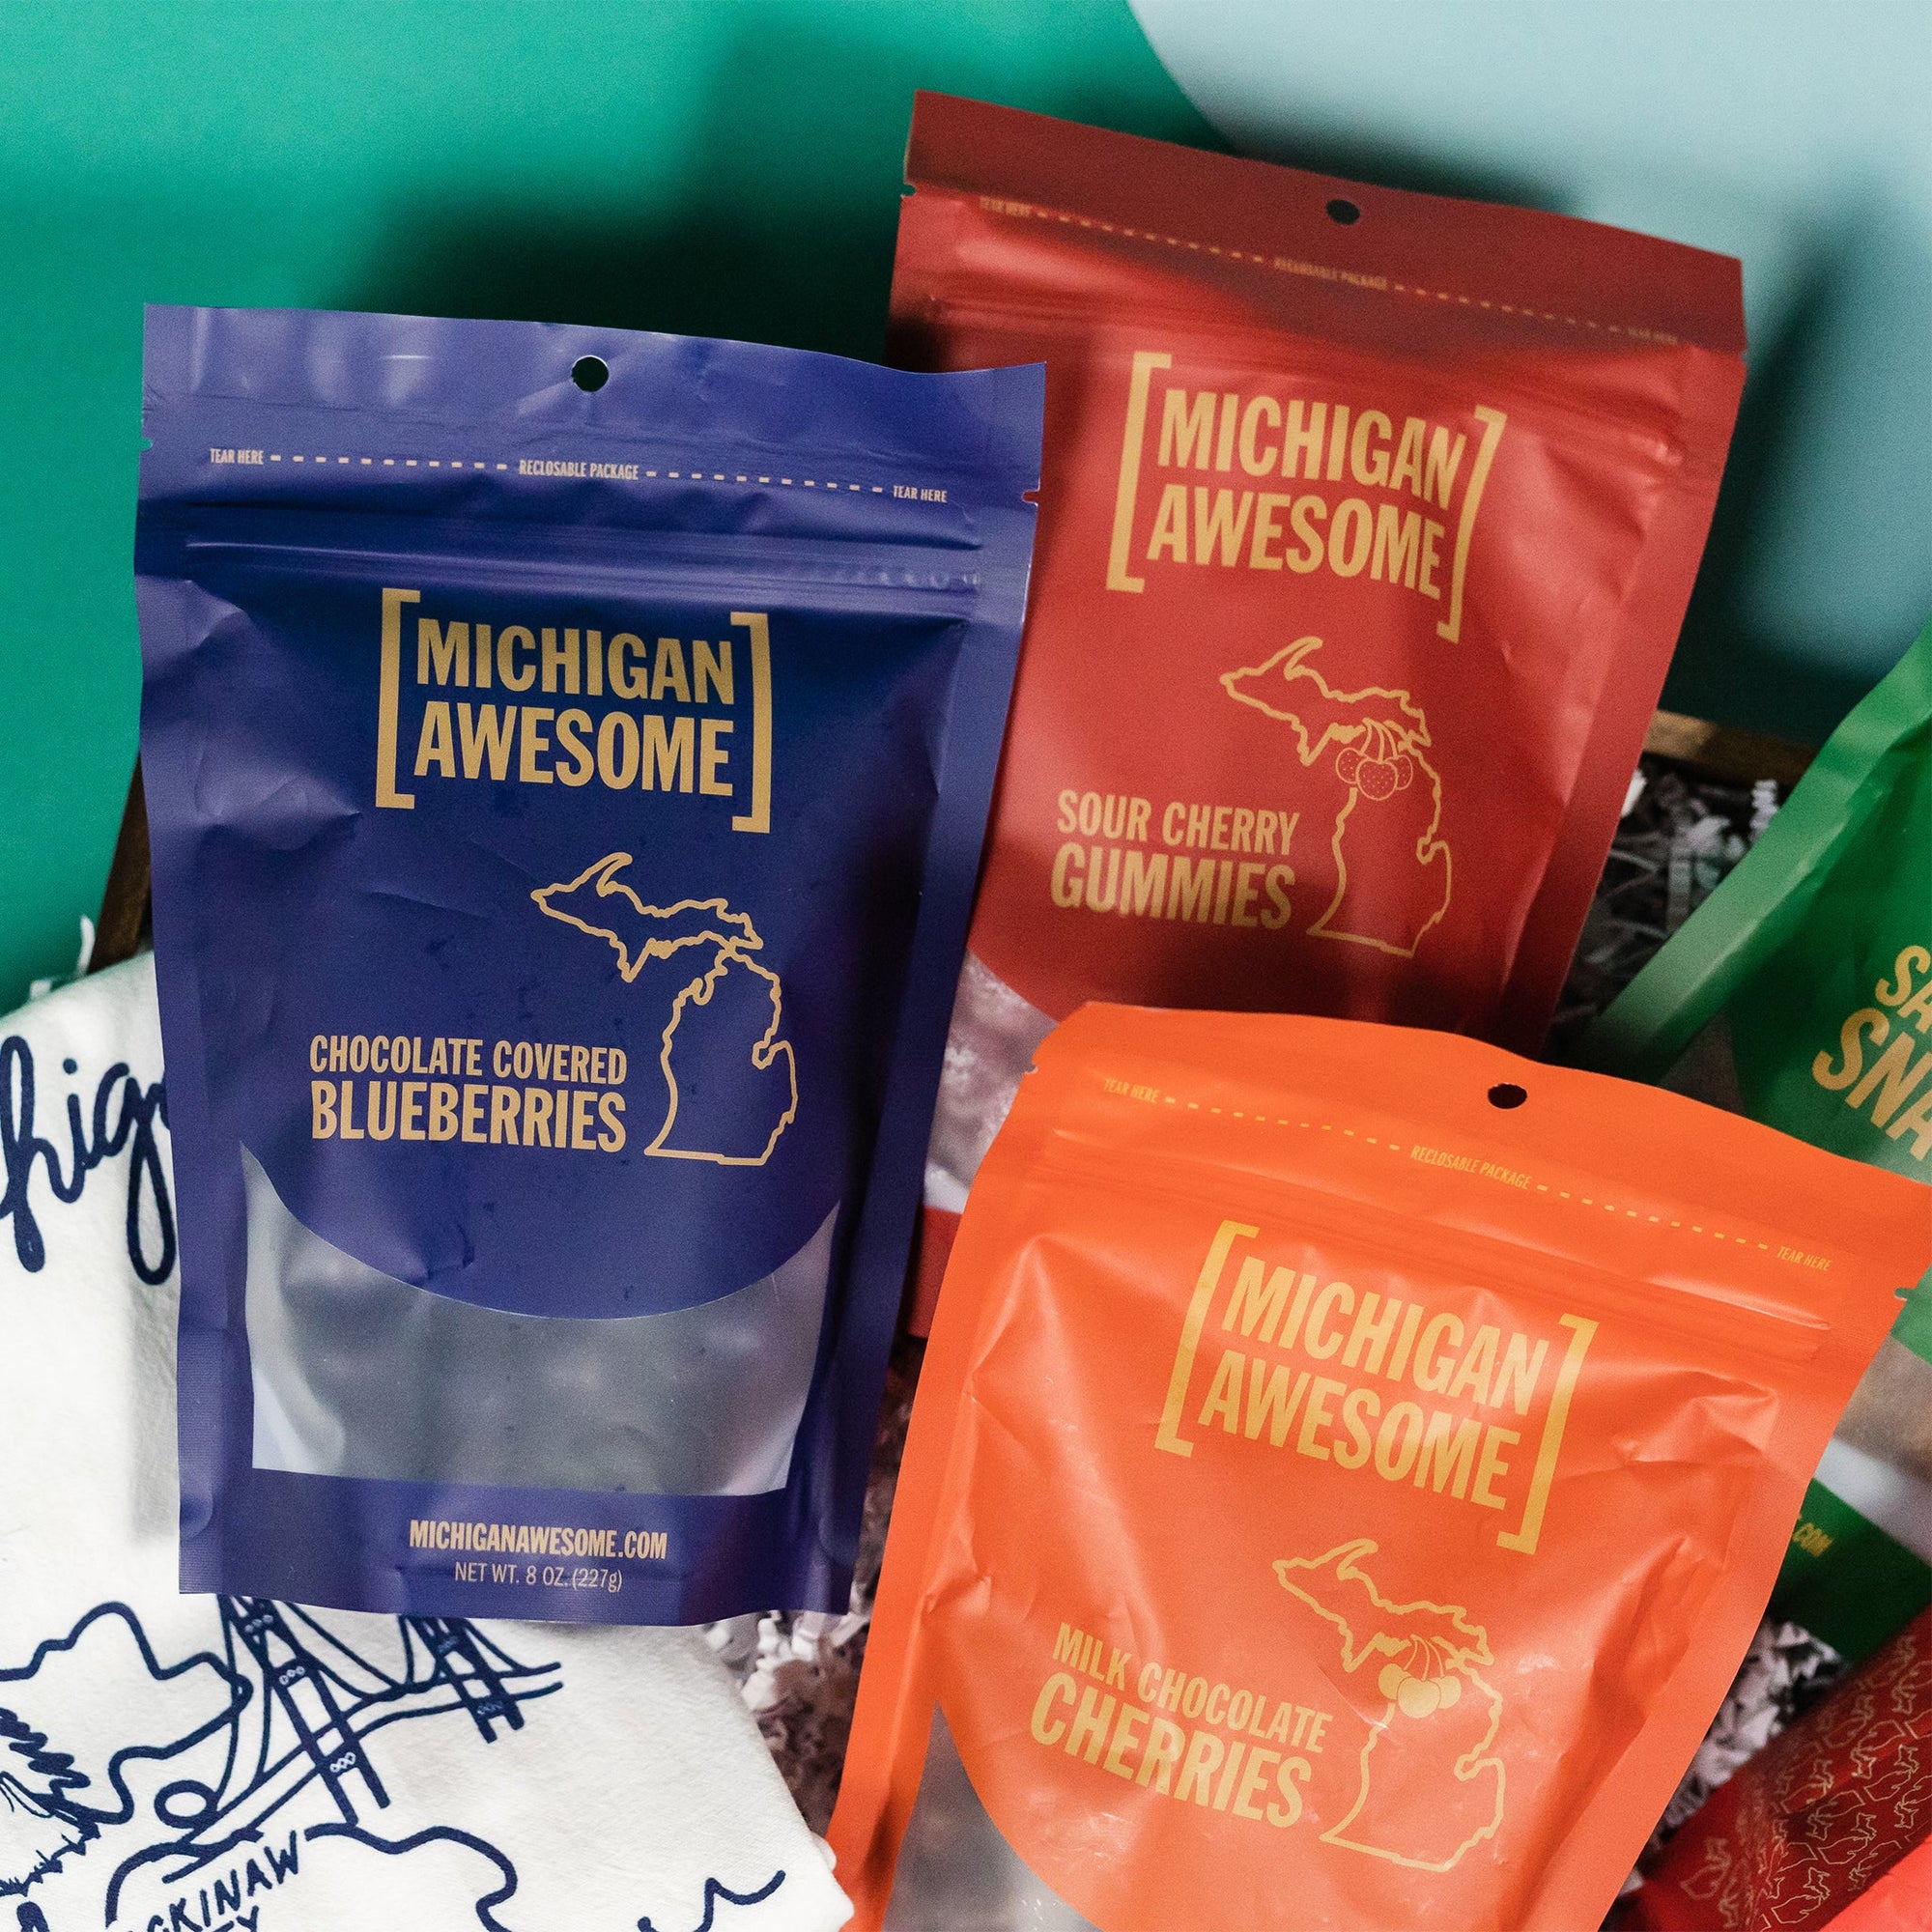 On a calming blue and teal background sits a wooden tray with an assortment of Michigan Awesome snacks and an illustrated map of Michigan tea towel. This photo is a close-up of Michigan Awesome Chocolate Covered Blueberries, Sour Cherry Gummies, and Milk Chocolate Cherries.